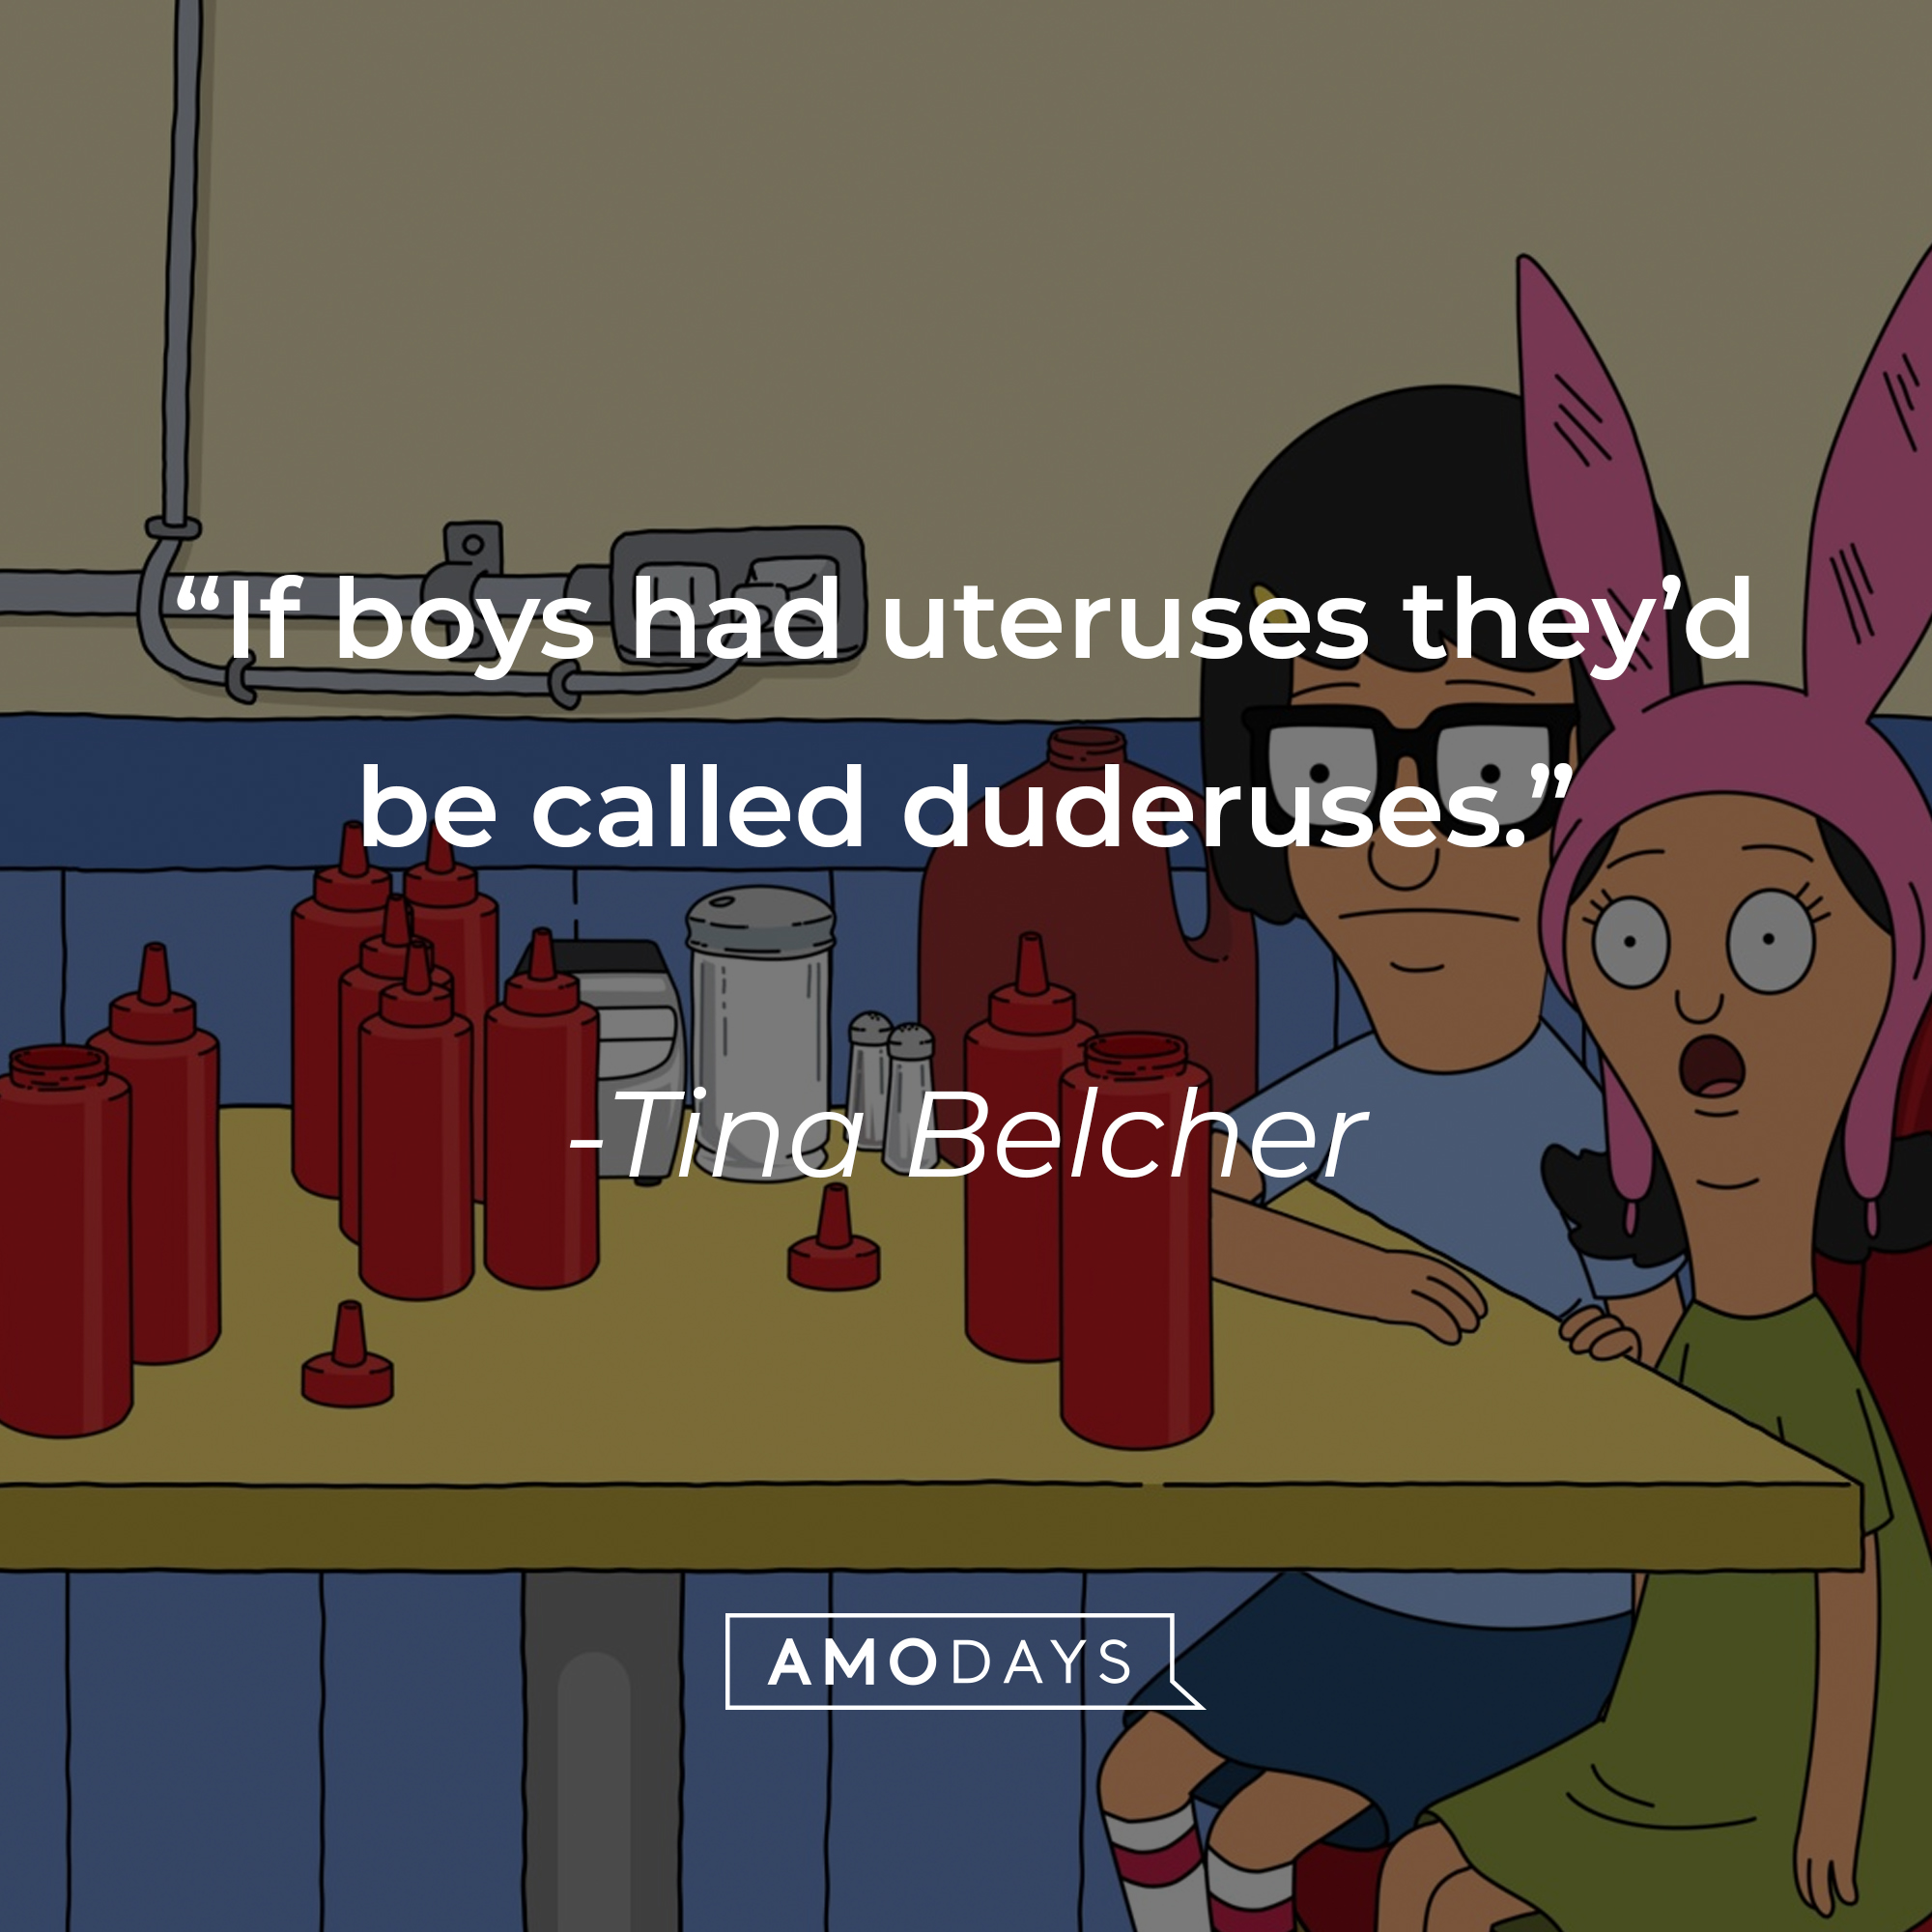 An Image of Tina Belcher with Louise, with Belcher’s quote: "If boys had uteruses, they'd be called duderuses." | Source: Facebook.com/BobsBurgers